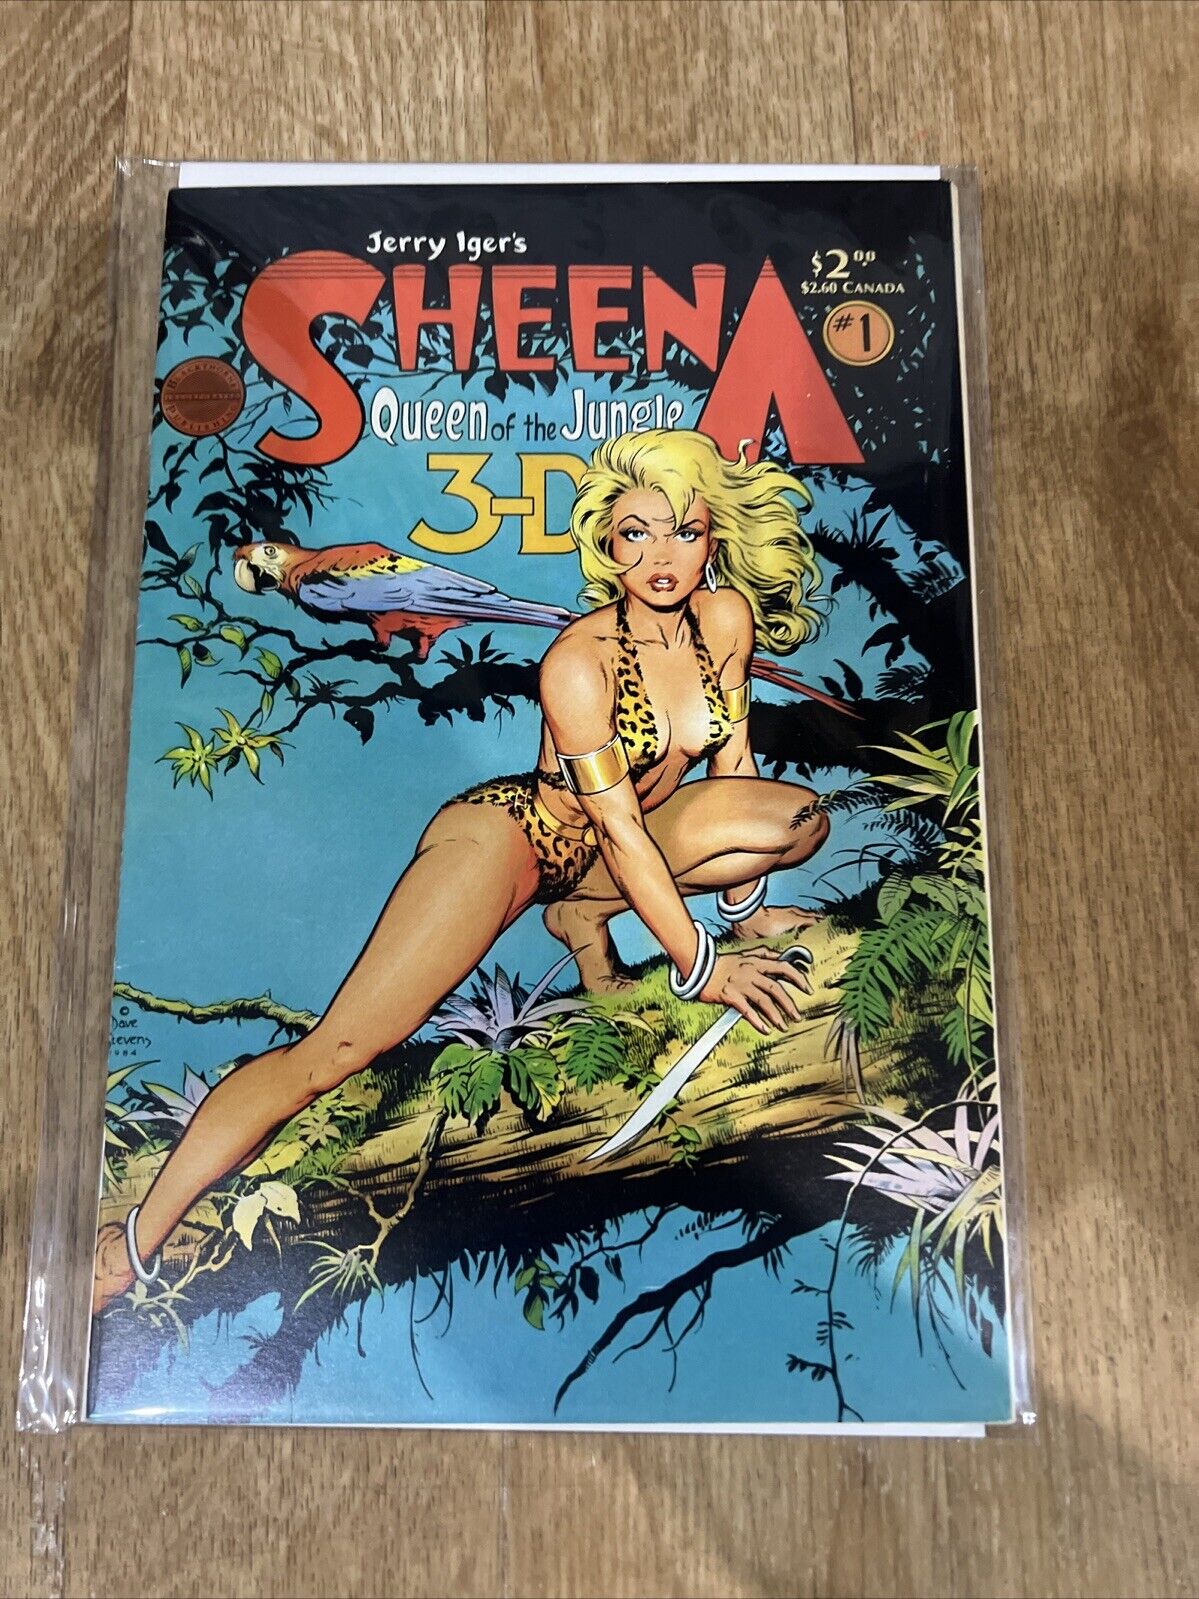 SHEENA QUEEN of the JUNGLE 3-D # 1 BLACKTHORNE PUBLISHING May 1985 DAVE STEVENS